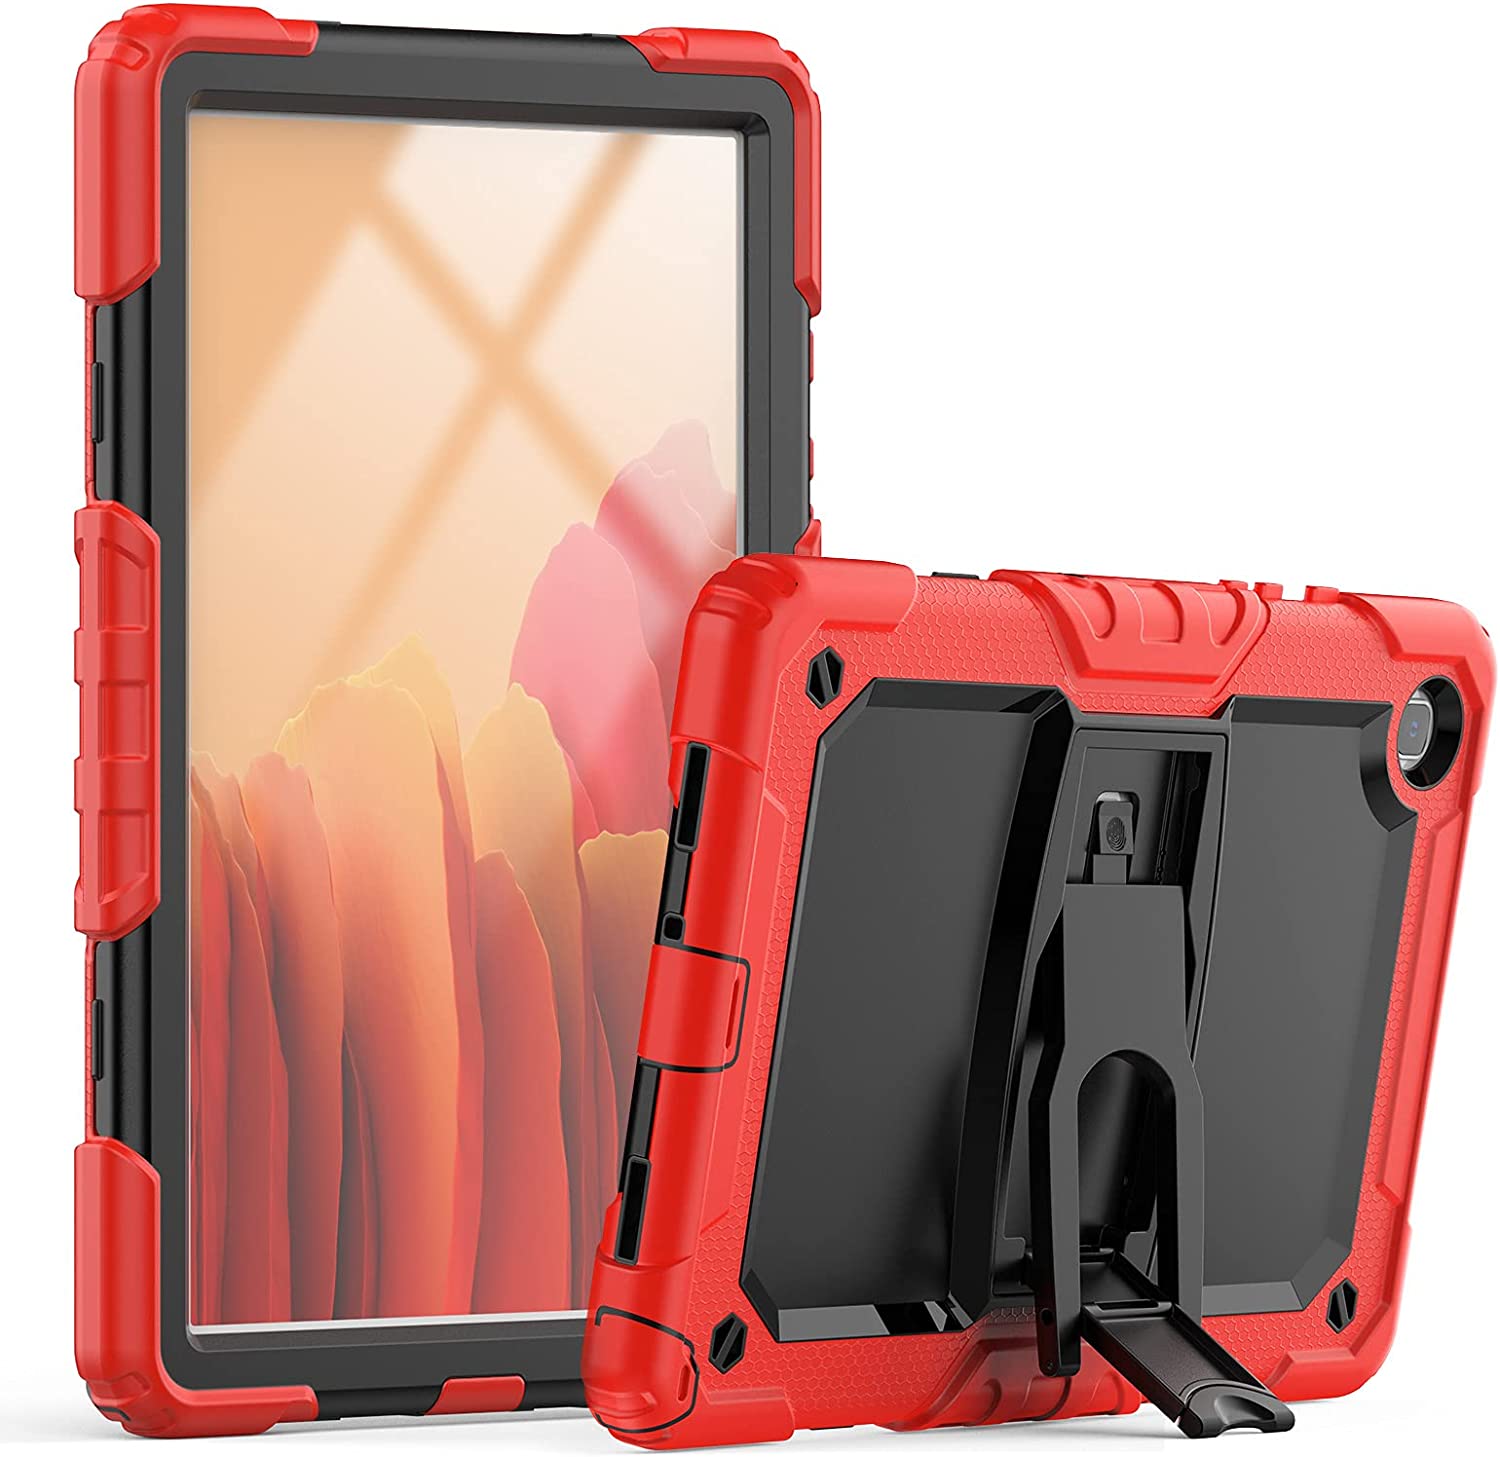 A product image of the Timecity case for the Galaxy Tab A7 10.4.